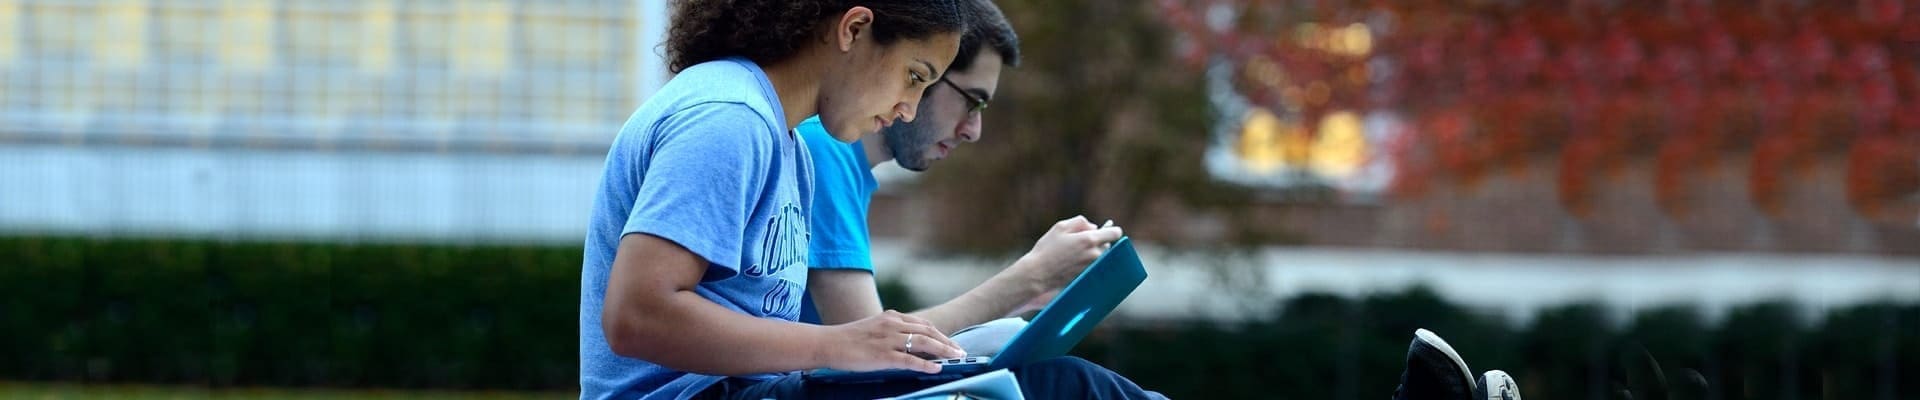 Two students outside on a lawn with laptops on their laps